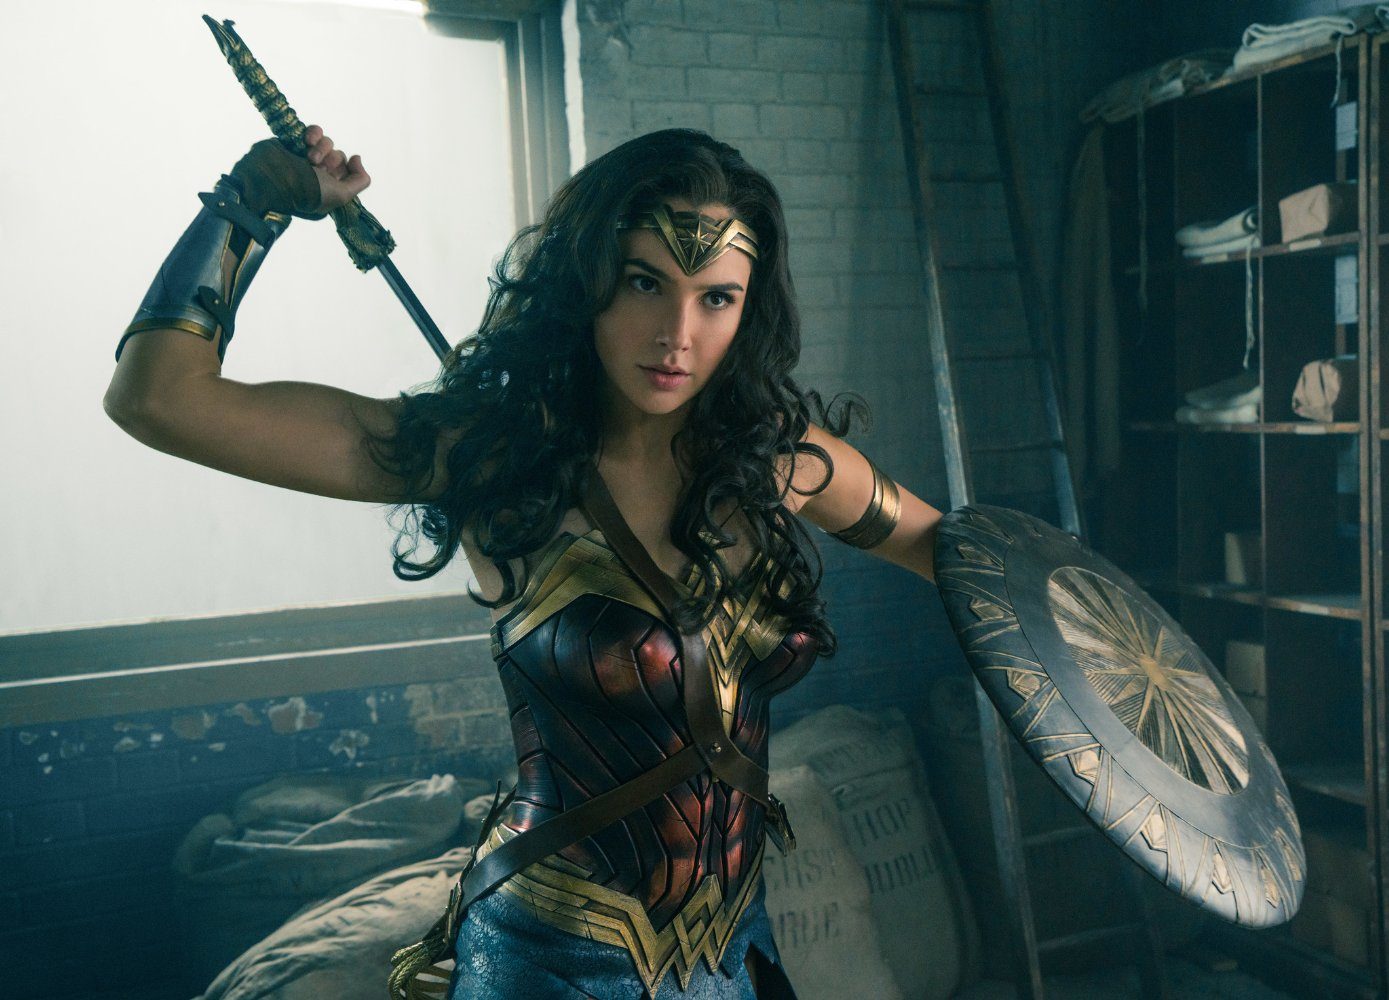 Reviving feminism in film: Why Wonder Woman is the film we need right now